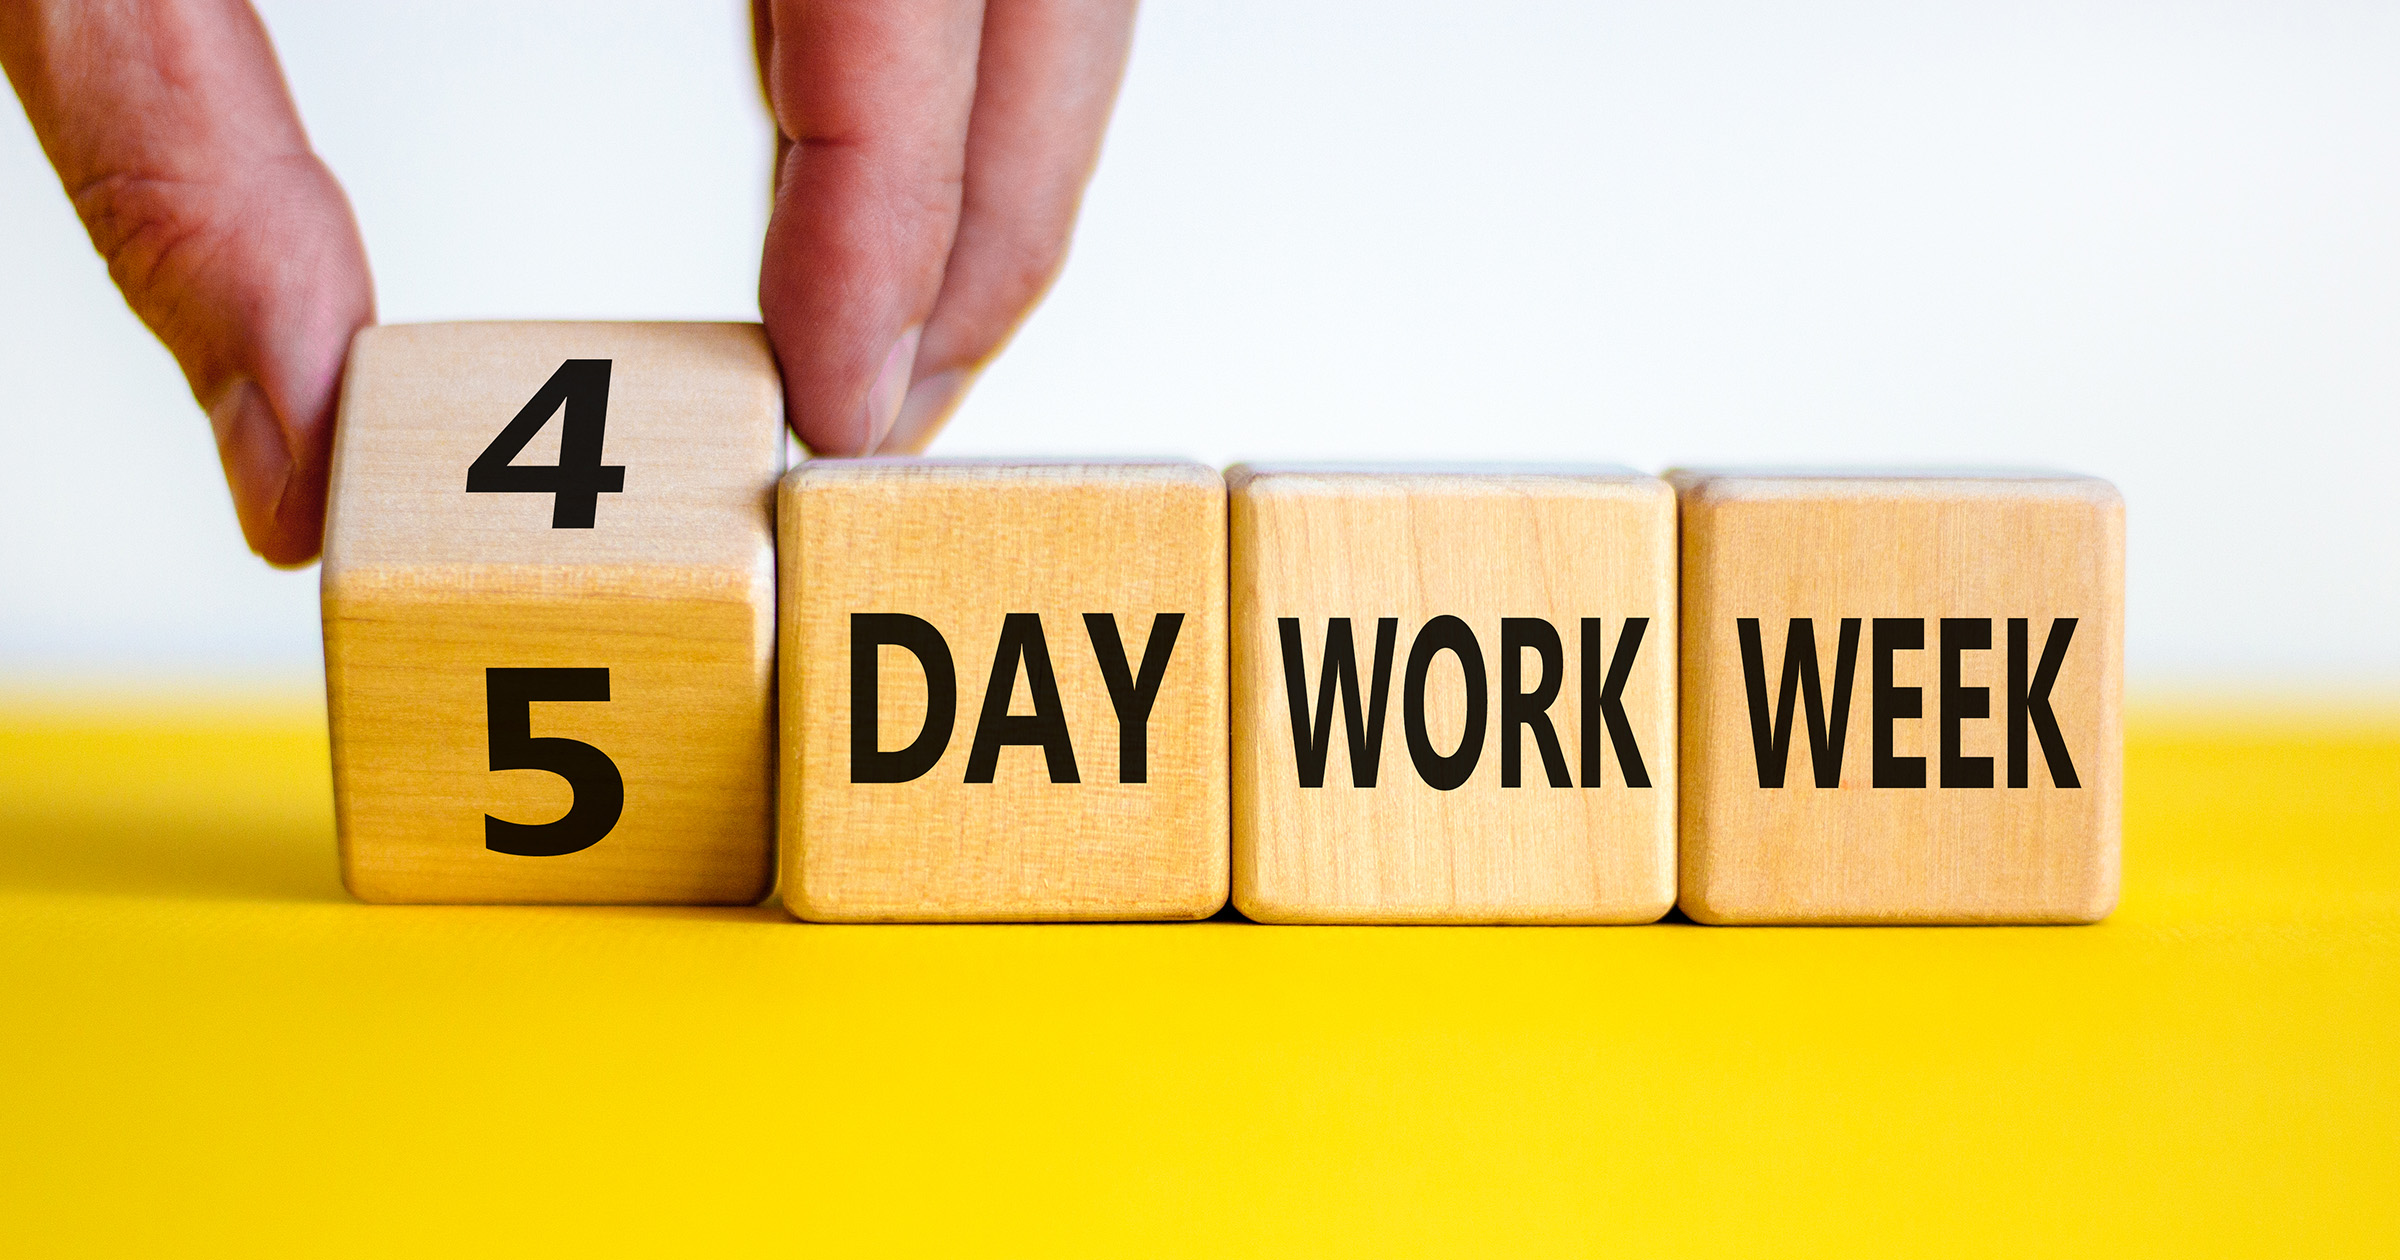 Sadly, 4-day work week has just failed in one of the longest corporate trials in the world